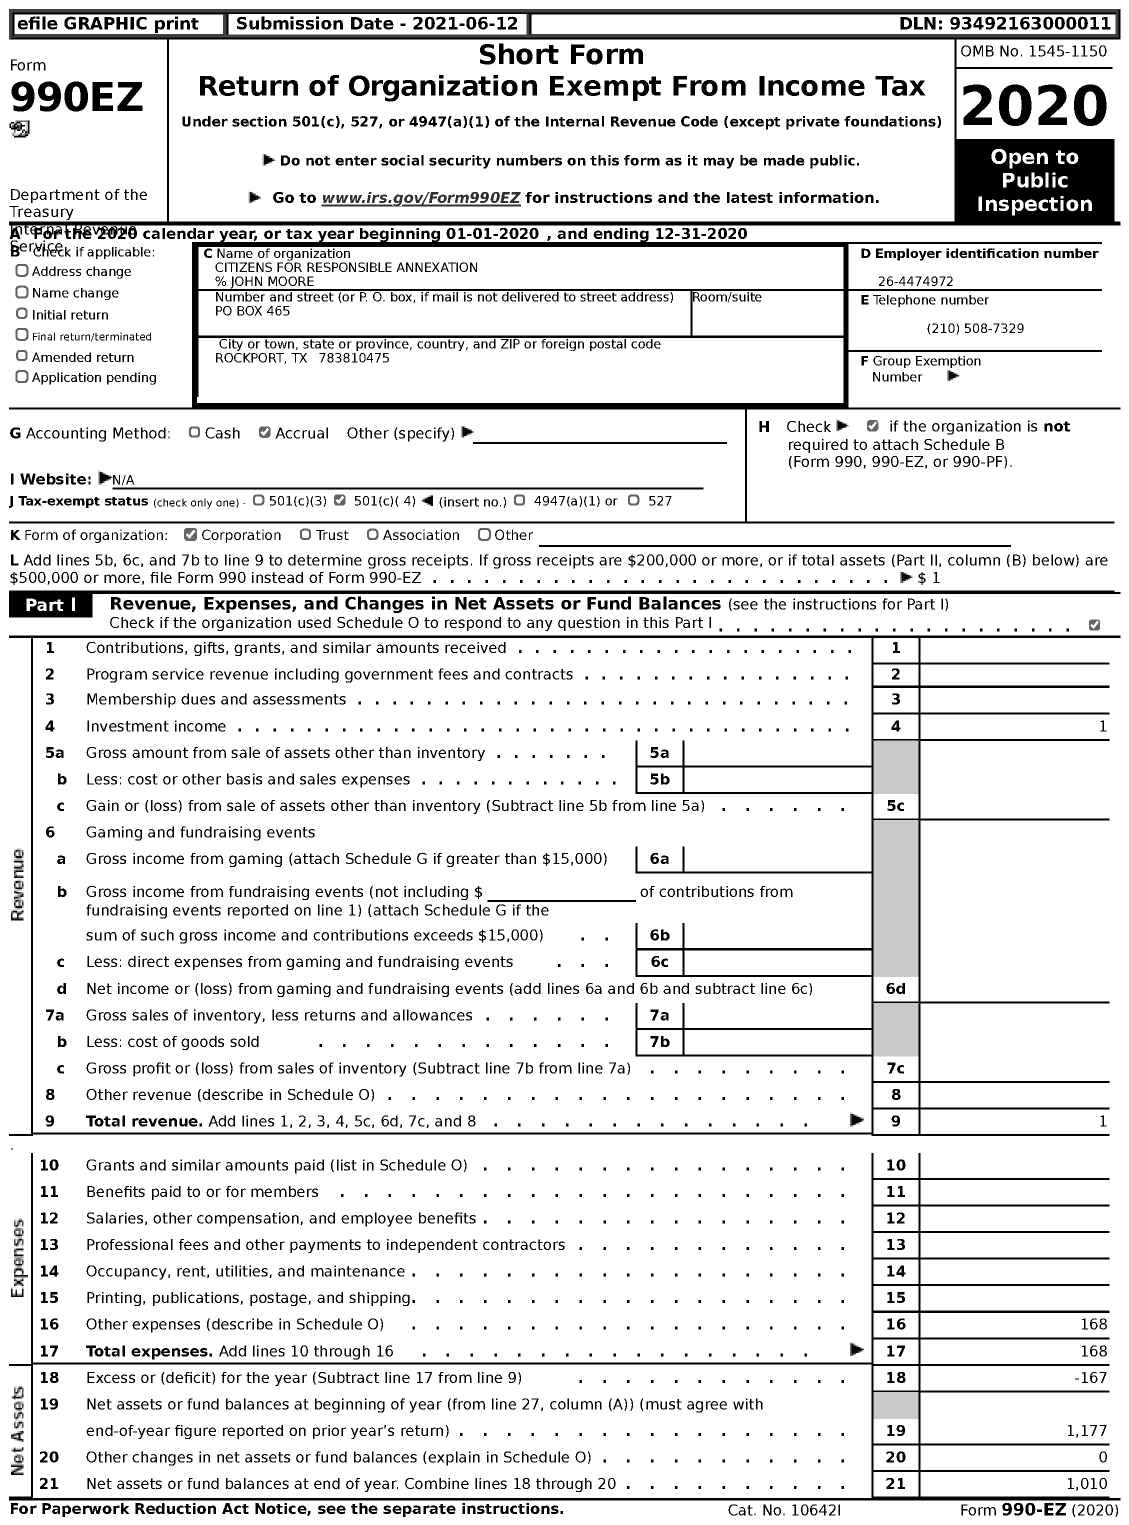 Image of first page of 2020 Form 990EZ for Citizens for Responsible Annexation